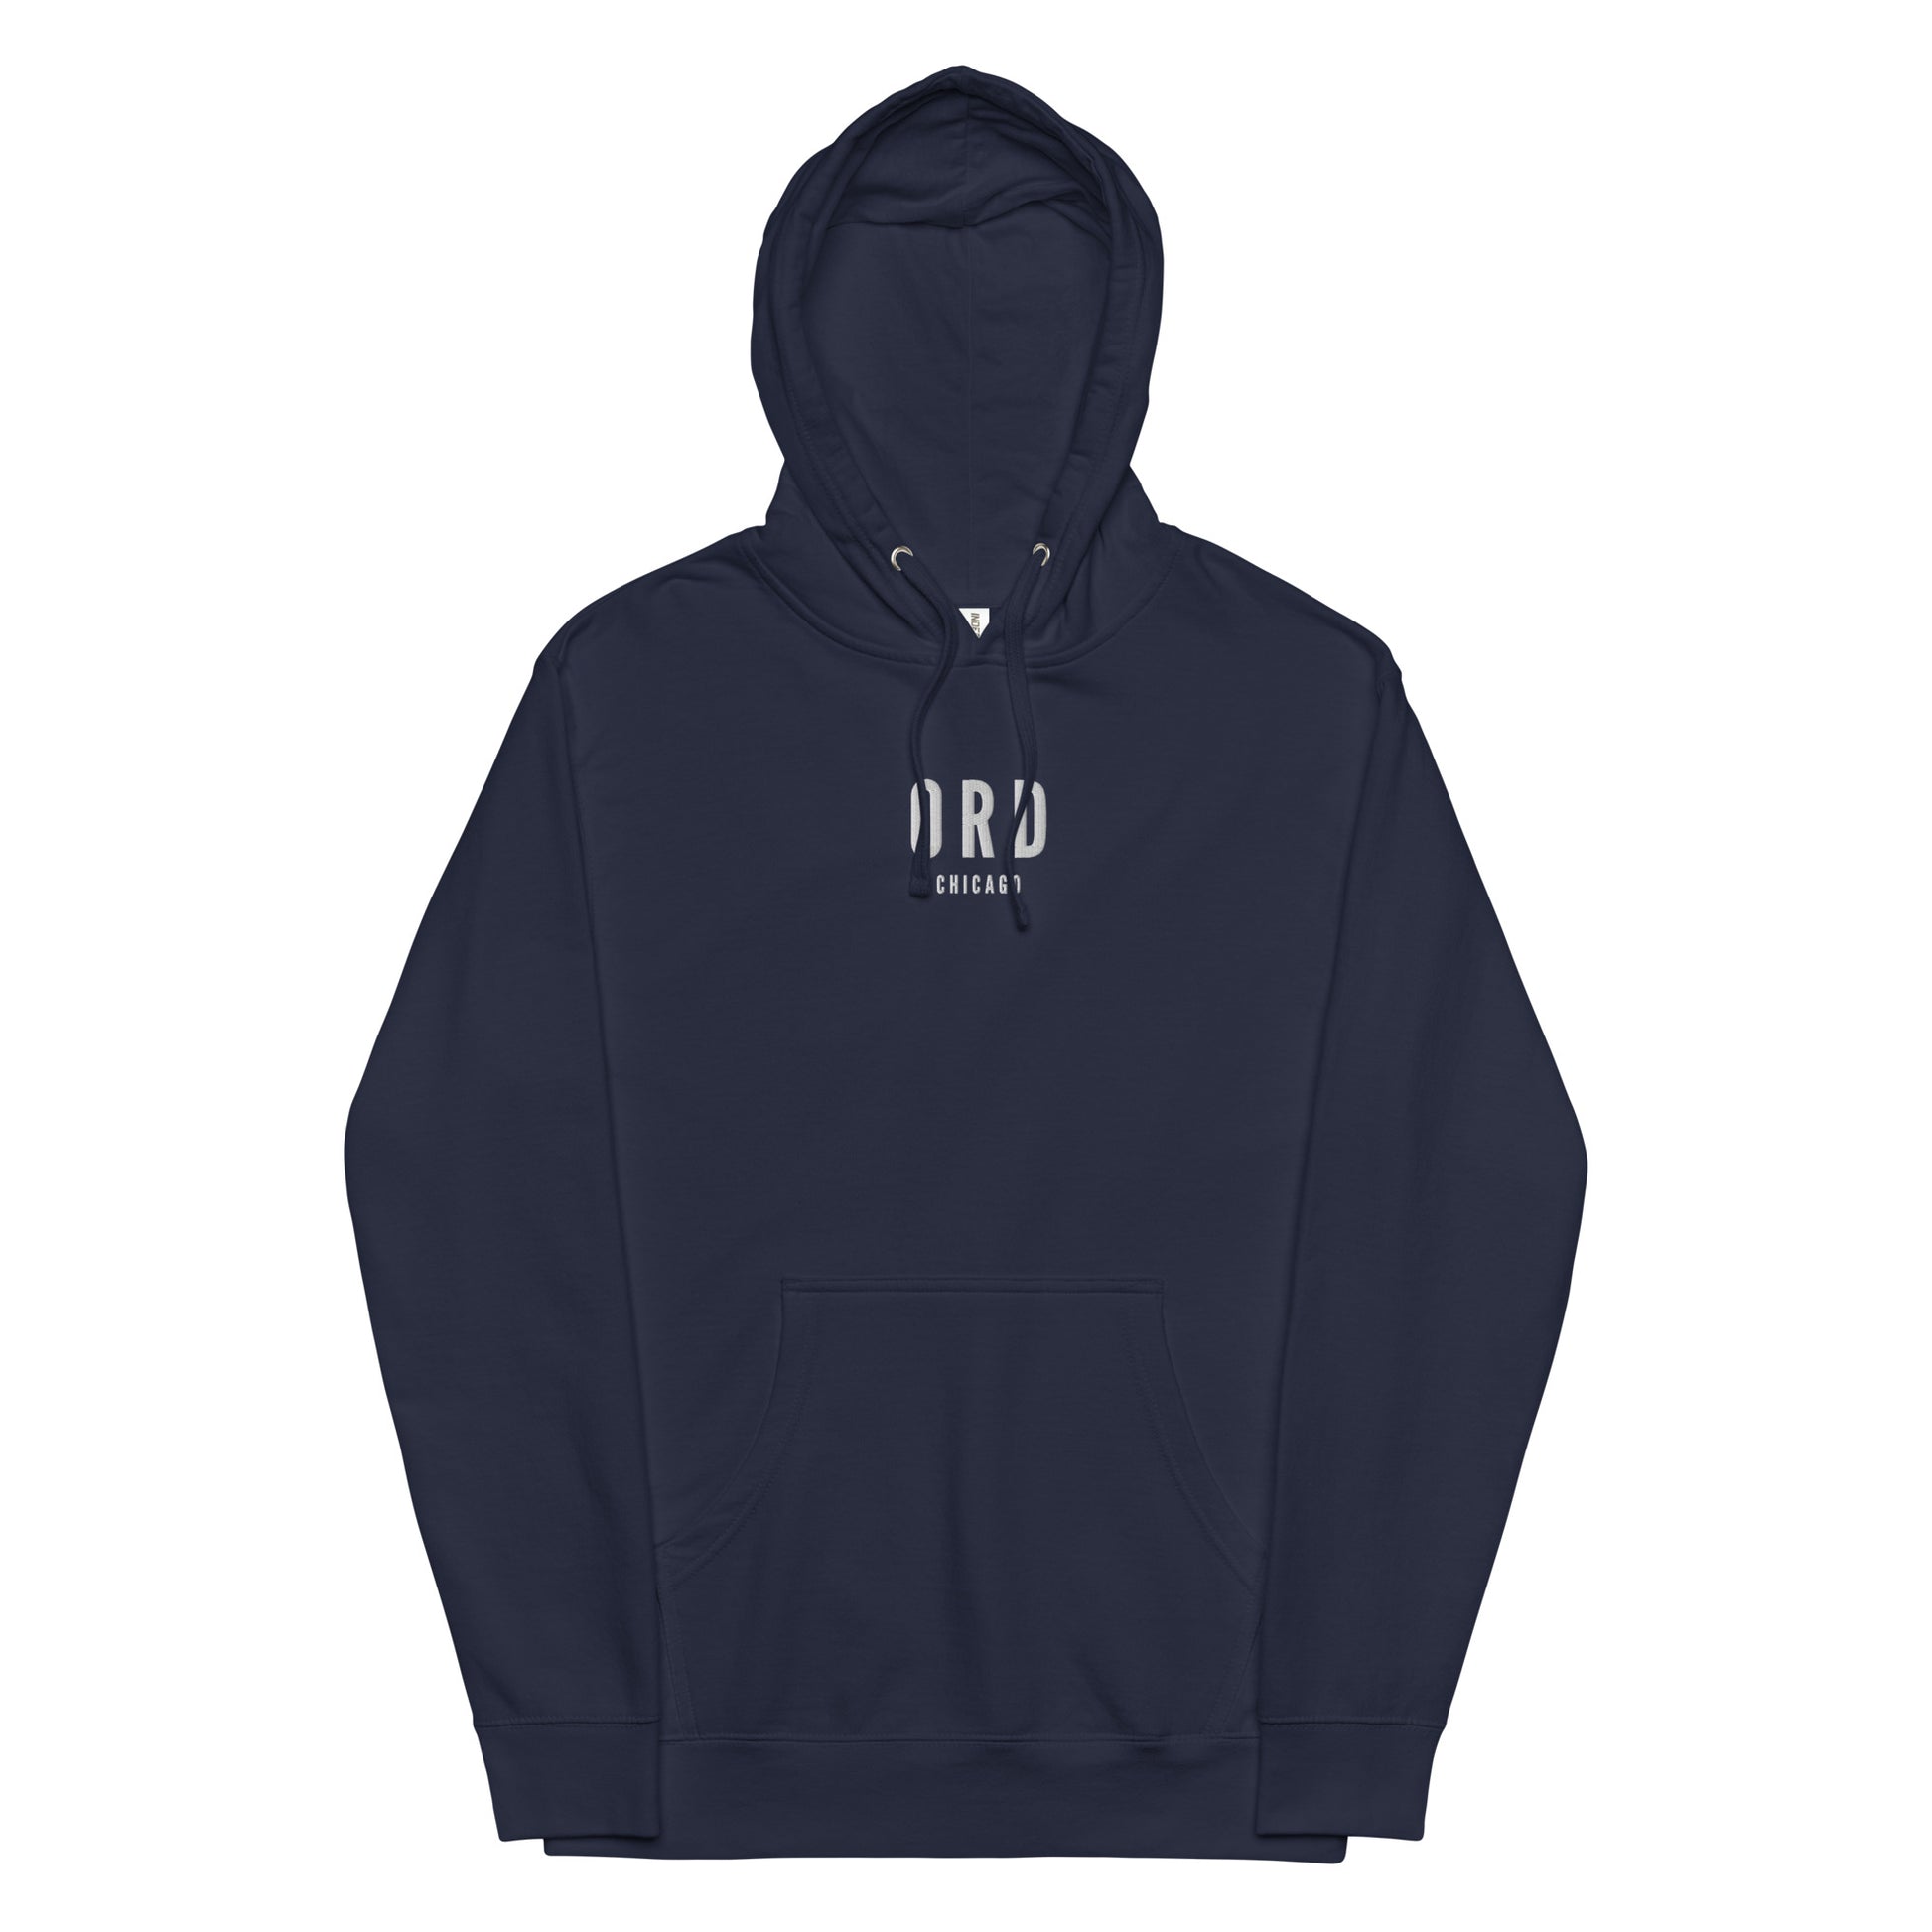 City Midweight Hoodie - White • ORD Chicago • YHM Designs - Image 11